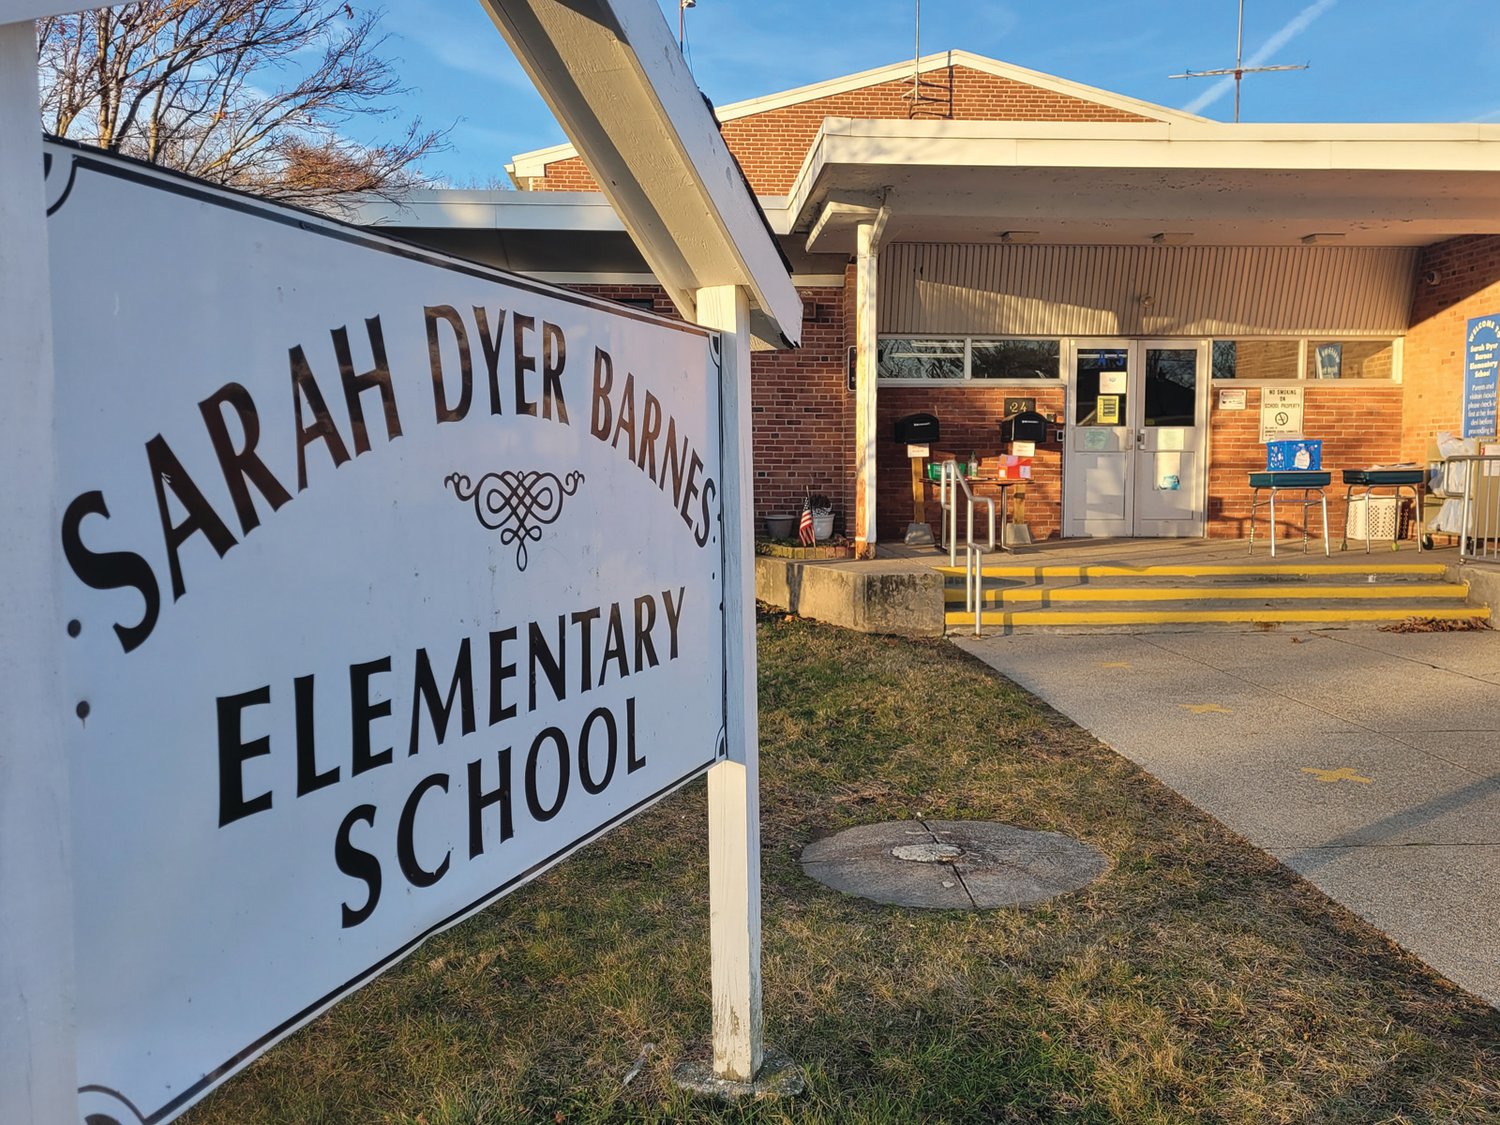 CLOSED FOR COVID: Sarah Dyer Barnes Elementary School in Johnston has been closed for the week after a significant COVID-19 outbreak.